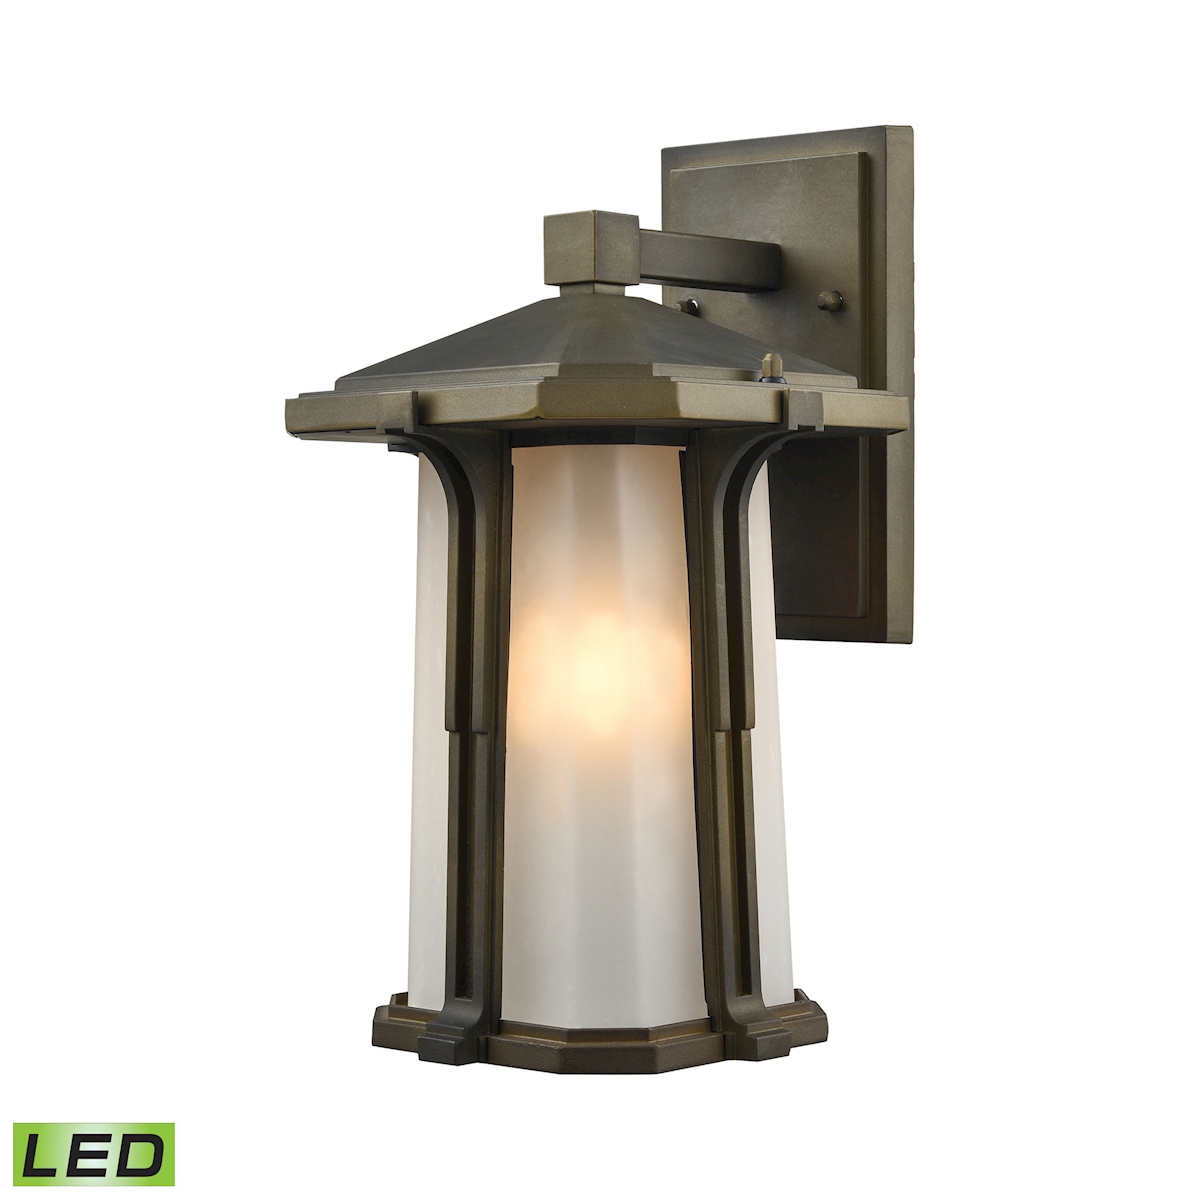 Brighton 1-Light Outdoor Wall Lamp in Smoked Bronze - Includes LED Bulb_EL-87091/1-LED